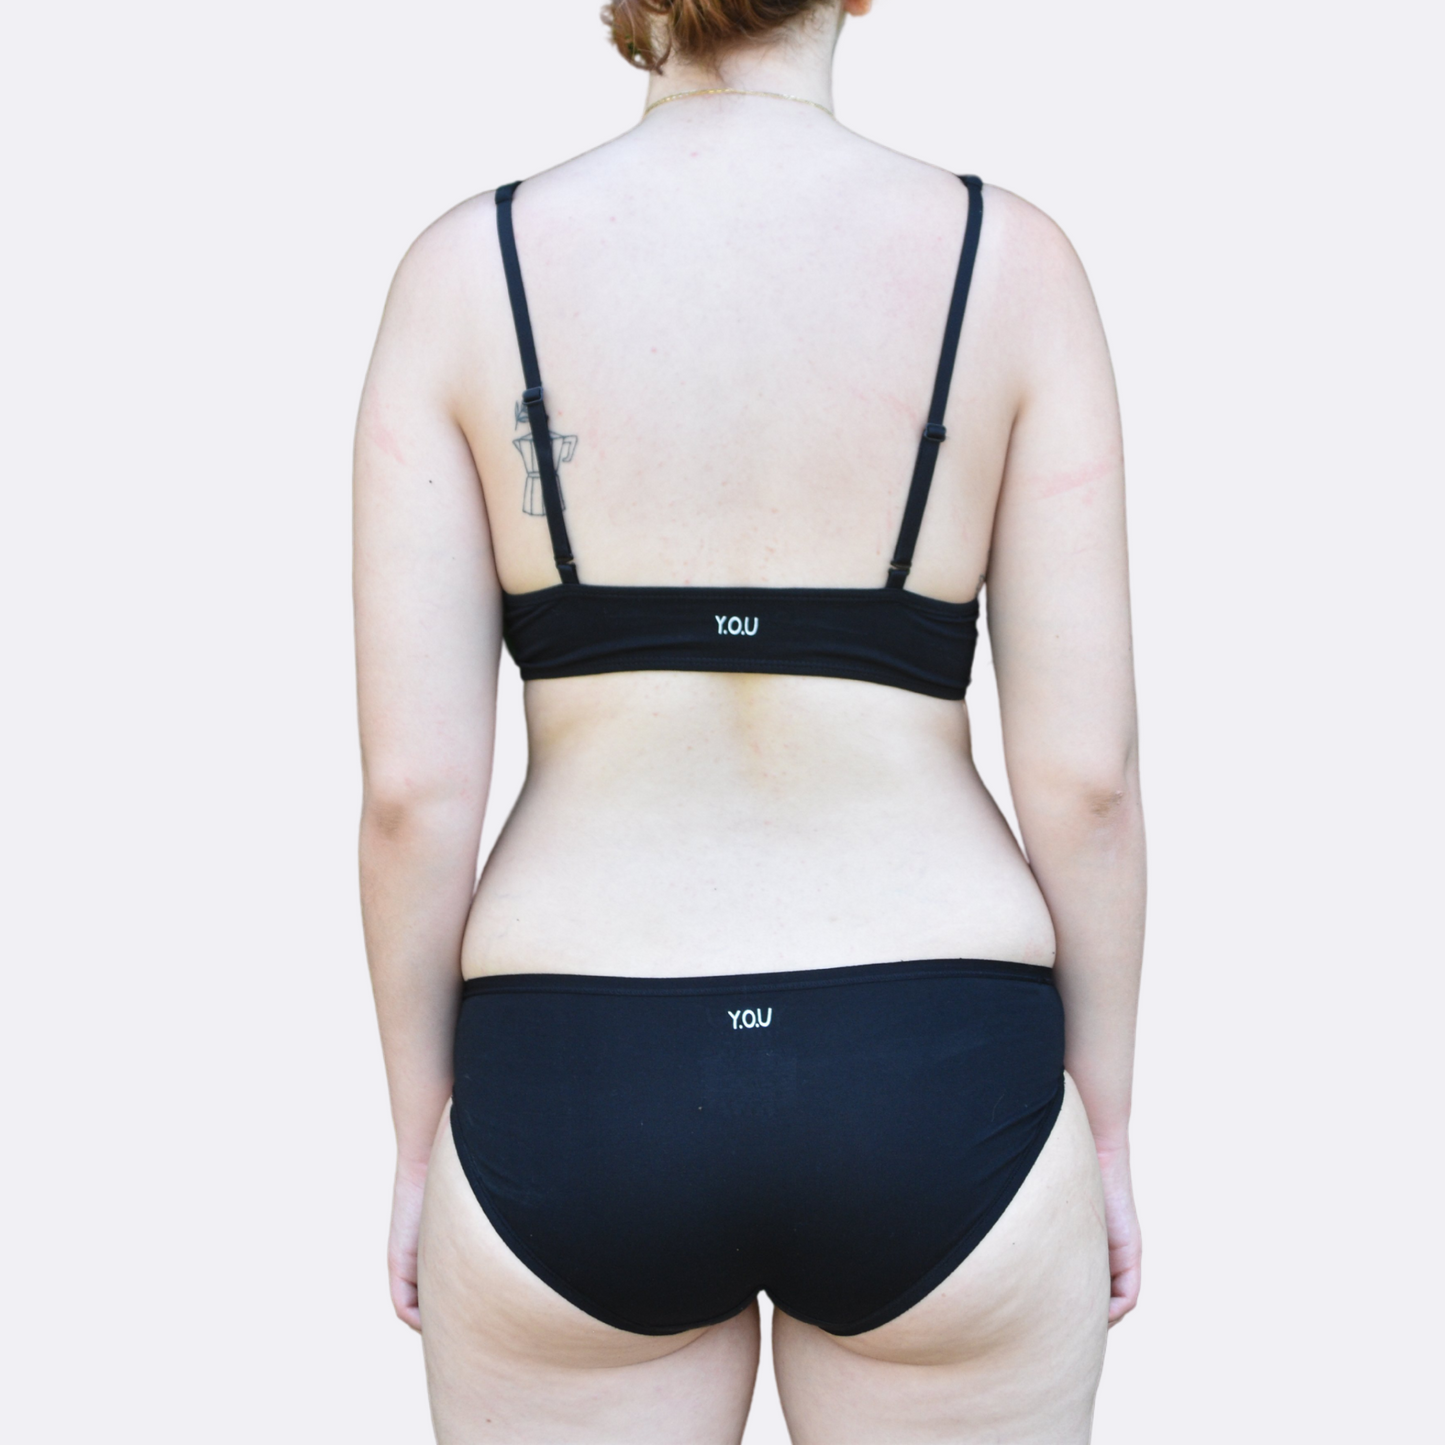 A light skinned woman wears the organic cotton Black bralette and bikini set - facing forward with the back of underwear showing